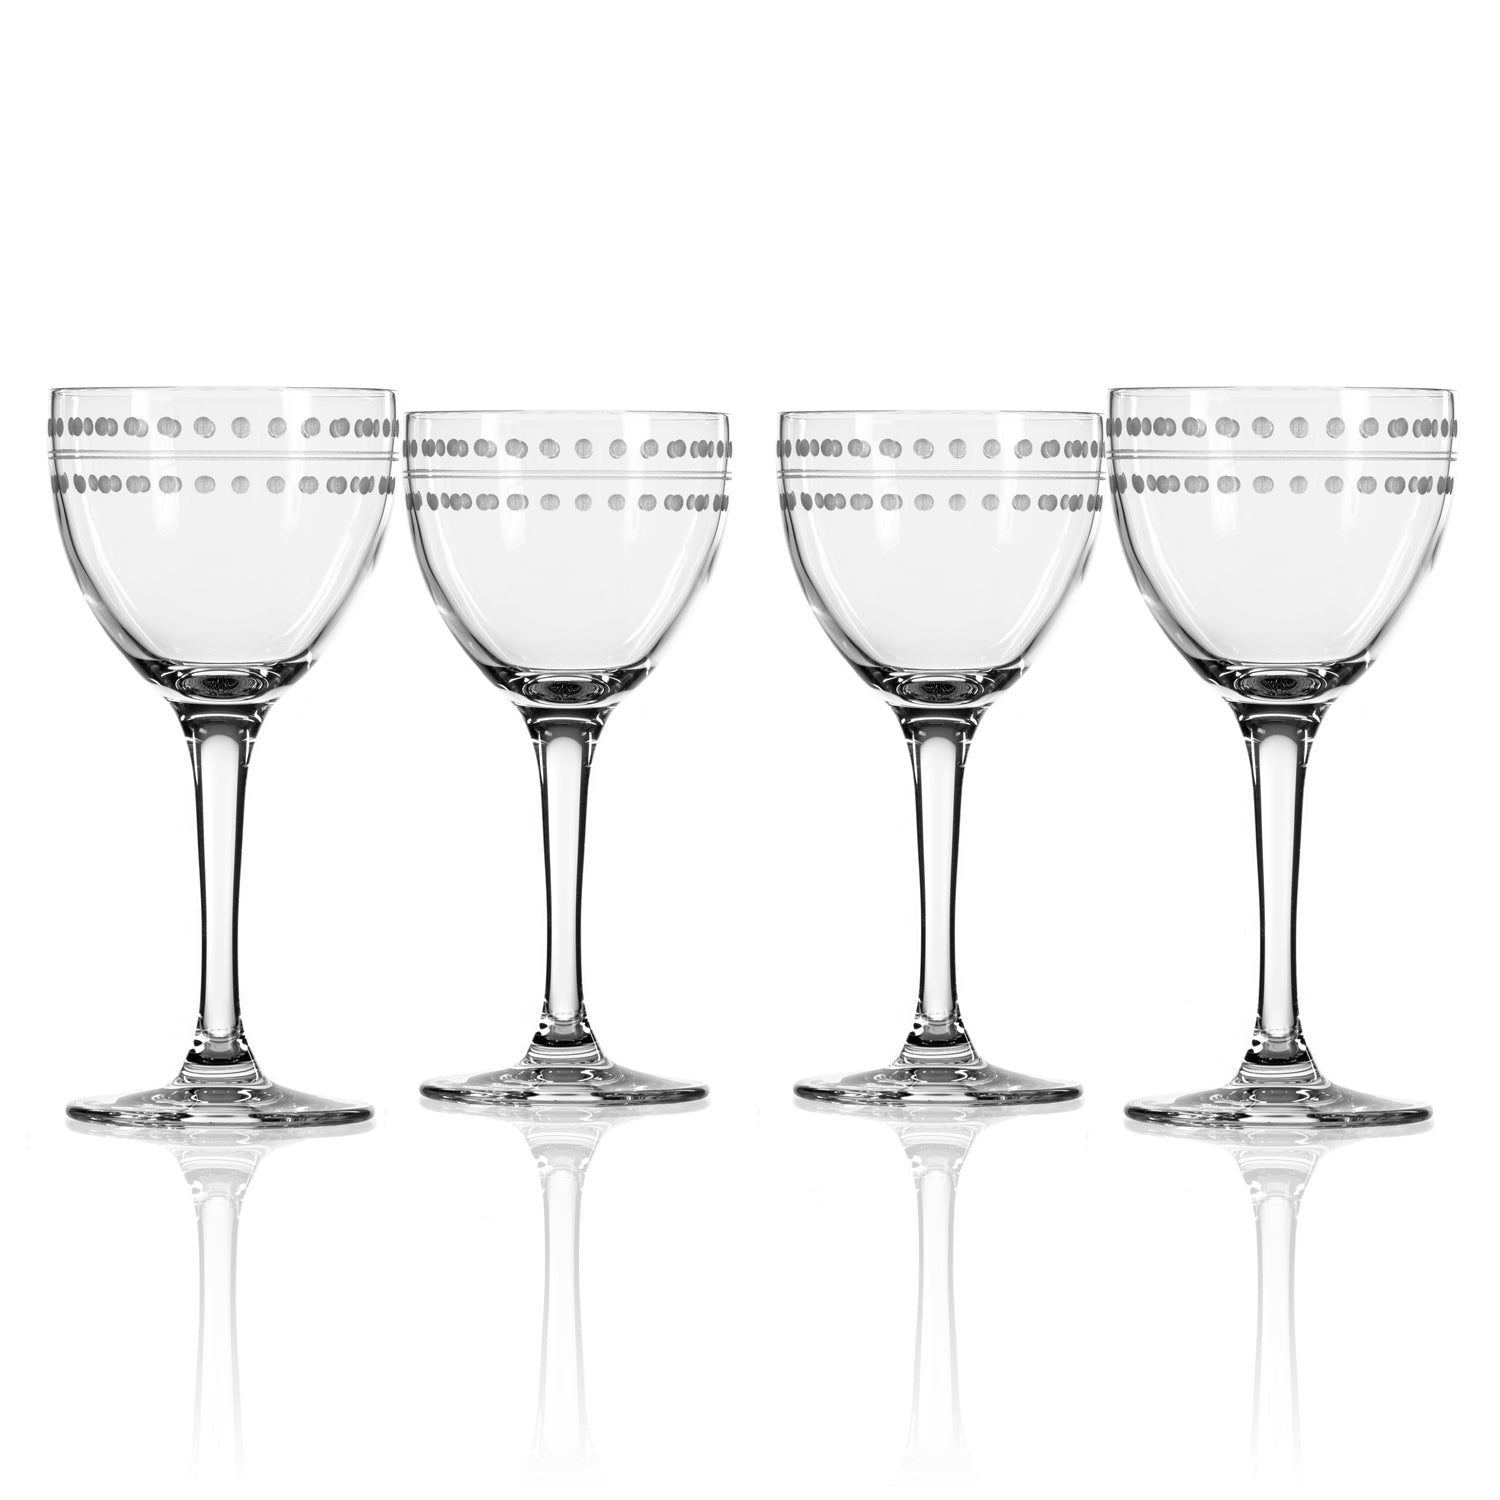 Mid-Century Modern Cocktail or Martini Glasses, Set of 4 at